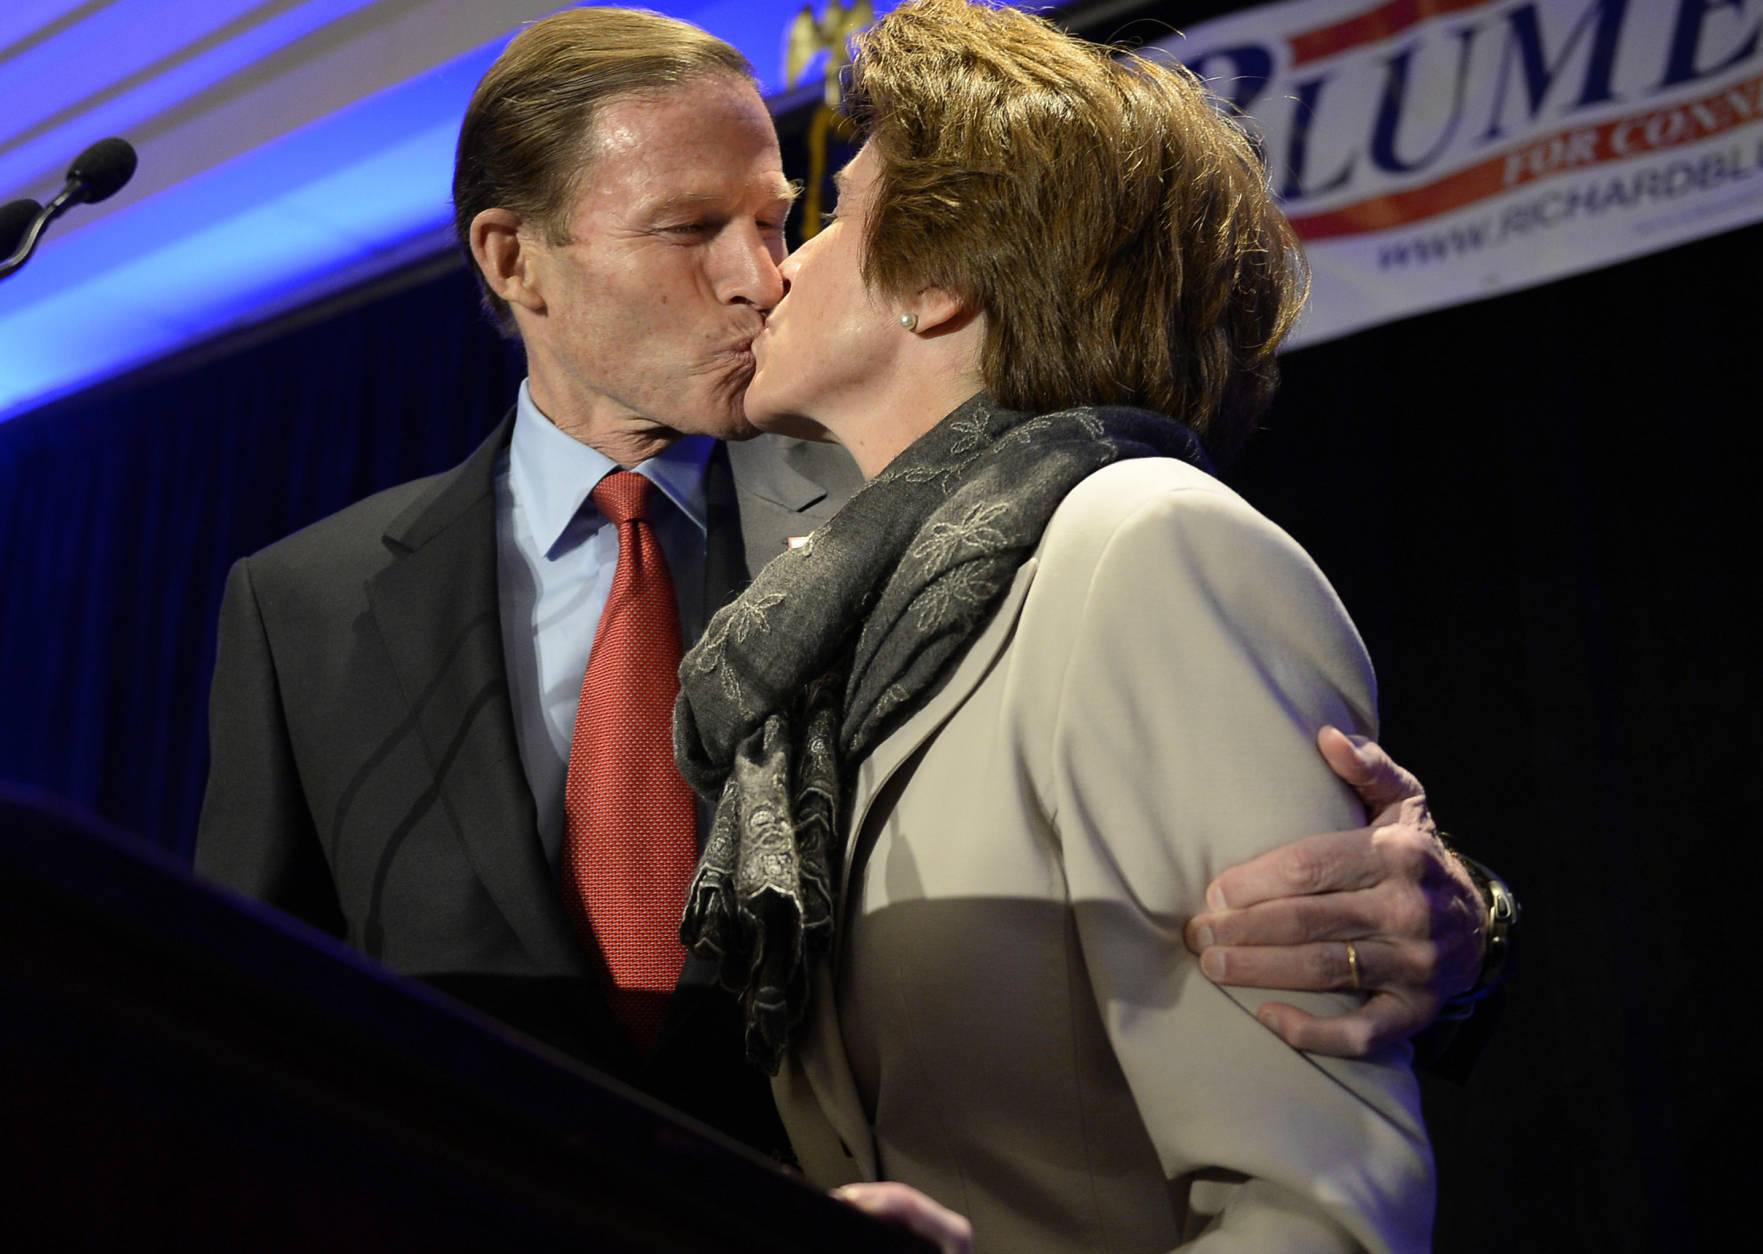 Sen. Richard Blumenthal, D-Conn., kisses his wife Cynthia at an election night rally celebrating his victory, Tuesday, Nov. 8, 2016, in Hartford, Conn. (AP Photo/Jessica Hill)